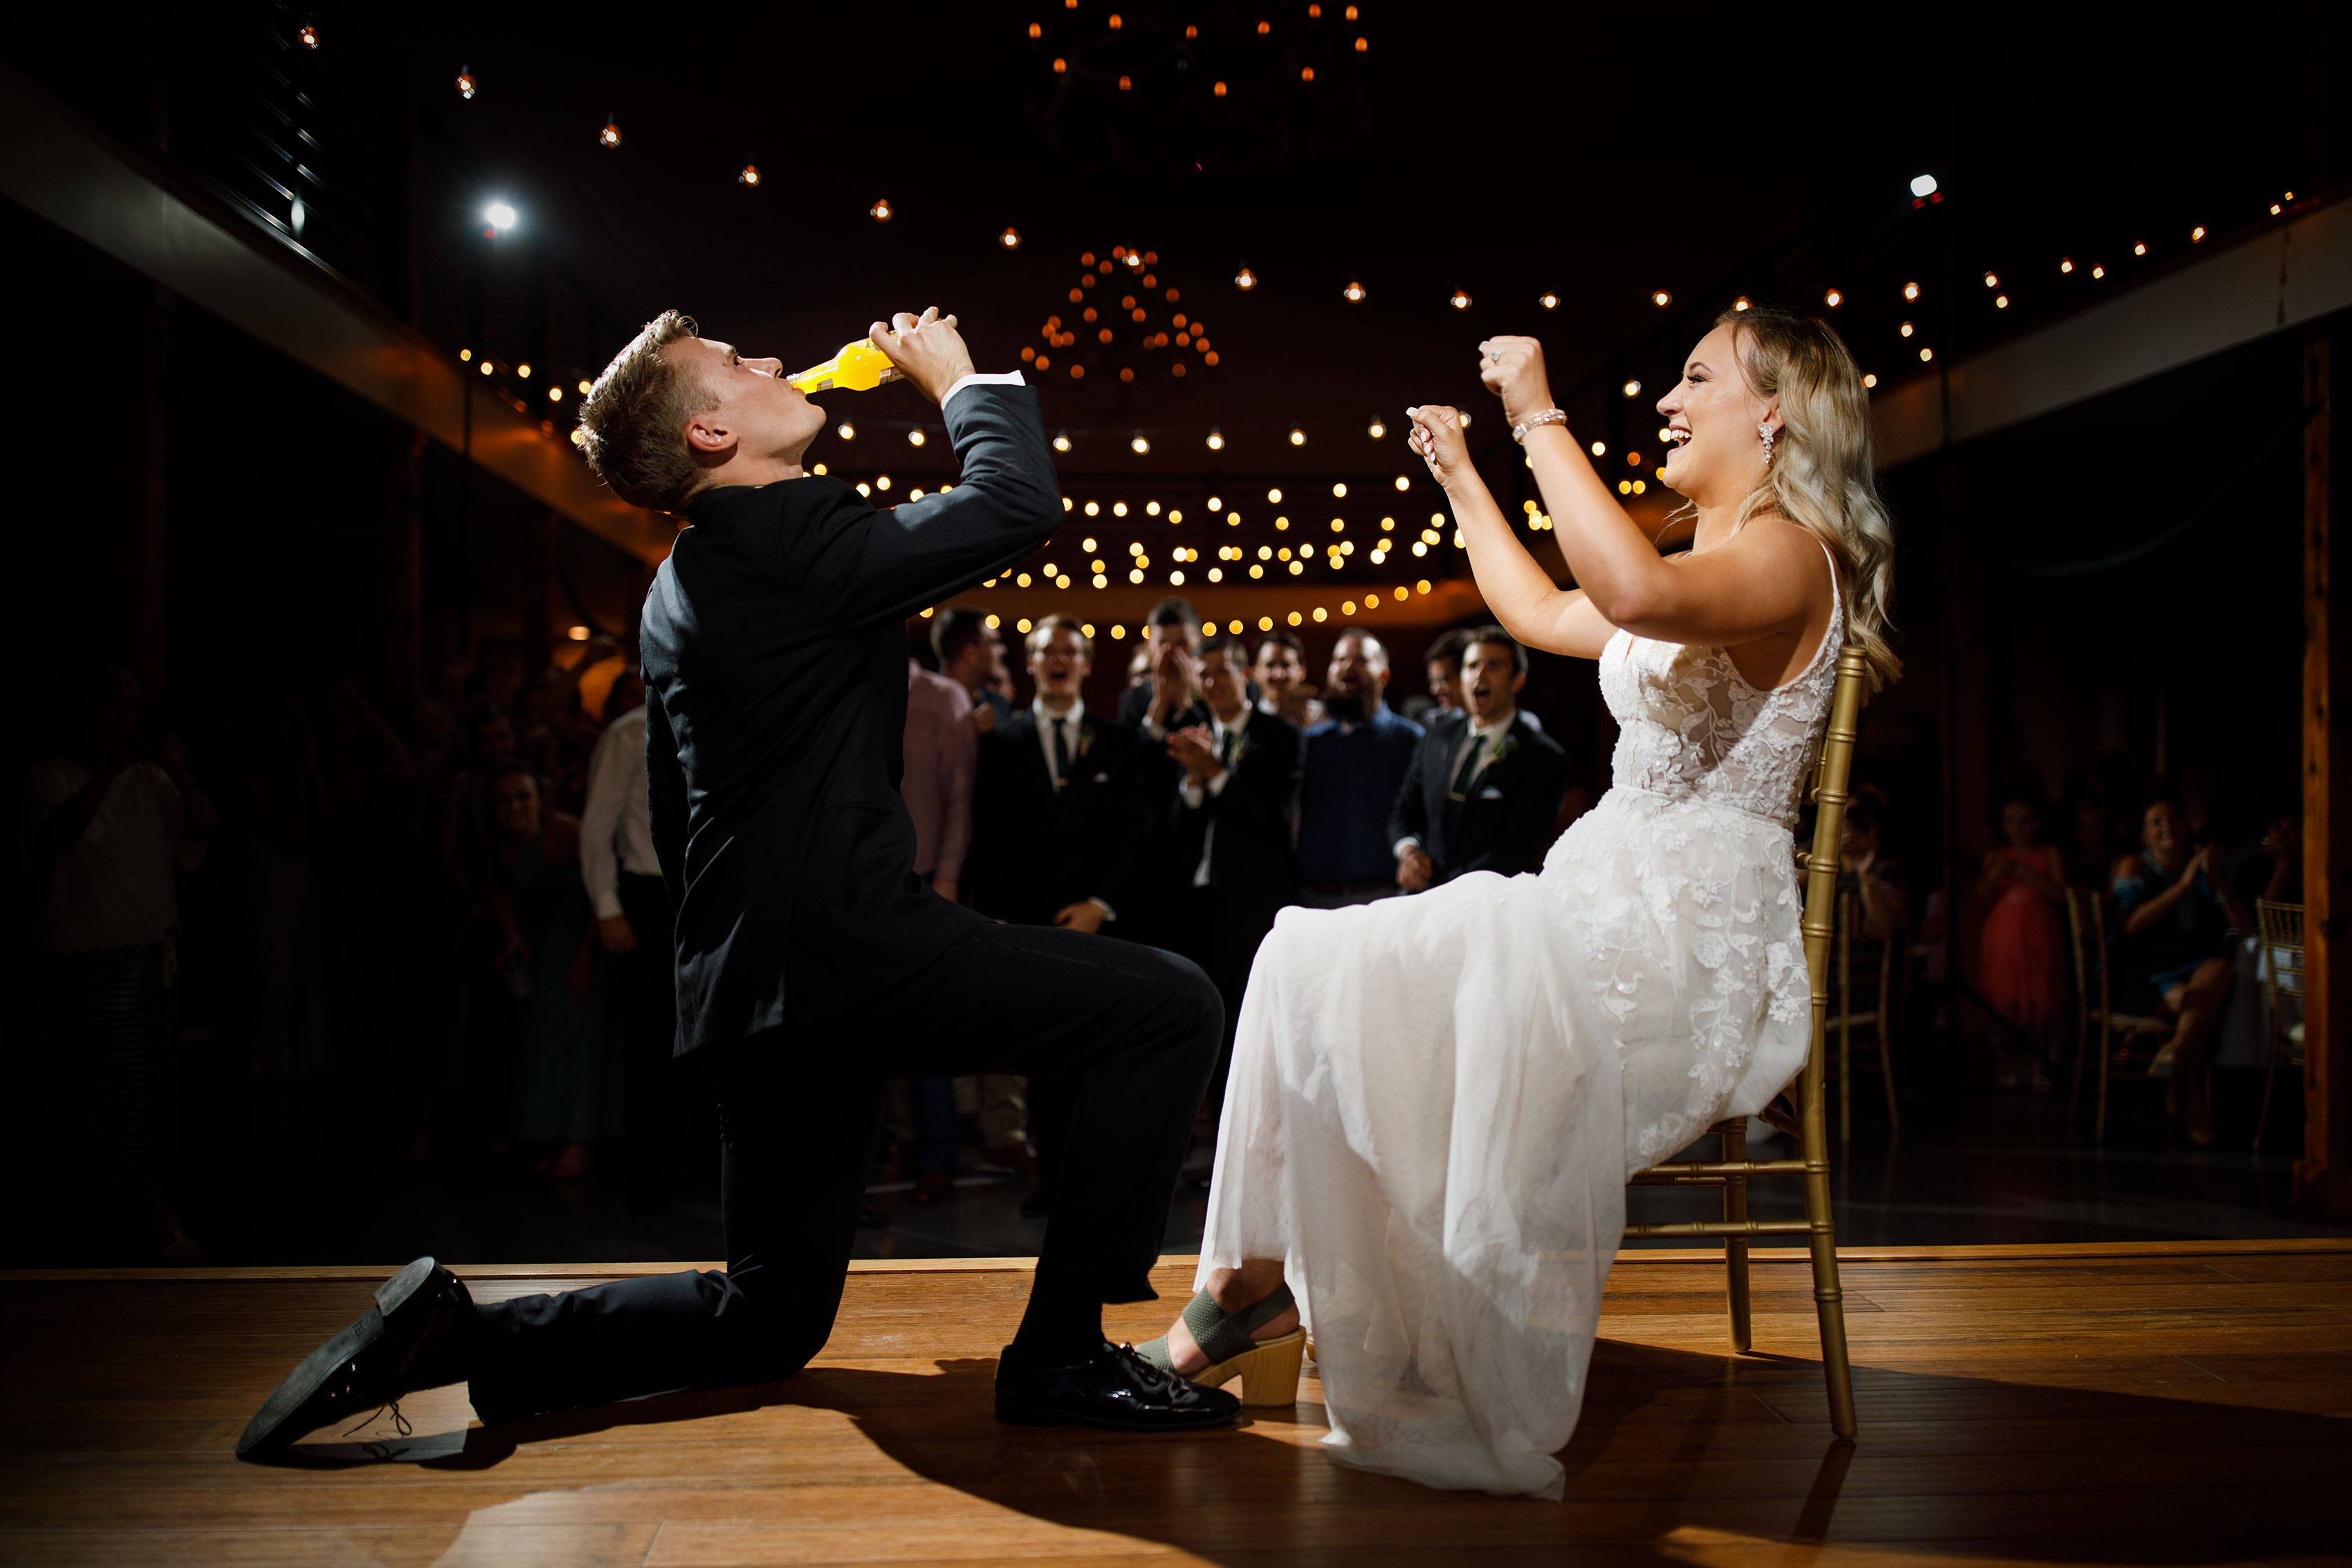 The groom gets iced by the bride during their wedding